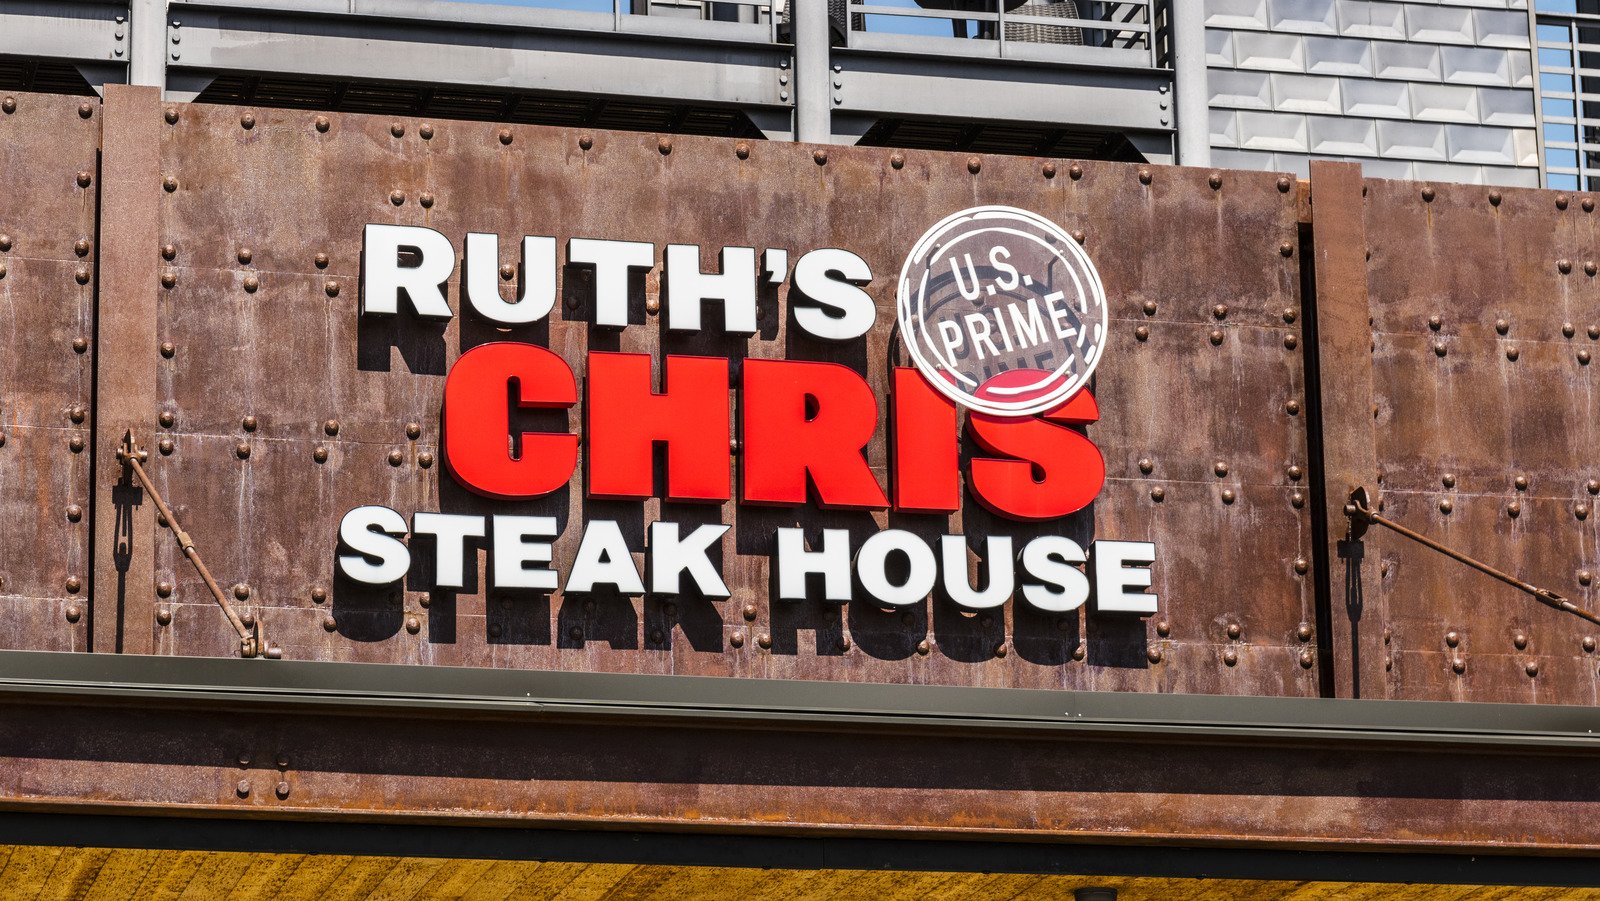 25 Popular Ruth's Chris Steak House Menu Items, Ranked Worst To Best - Mashed